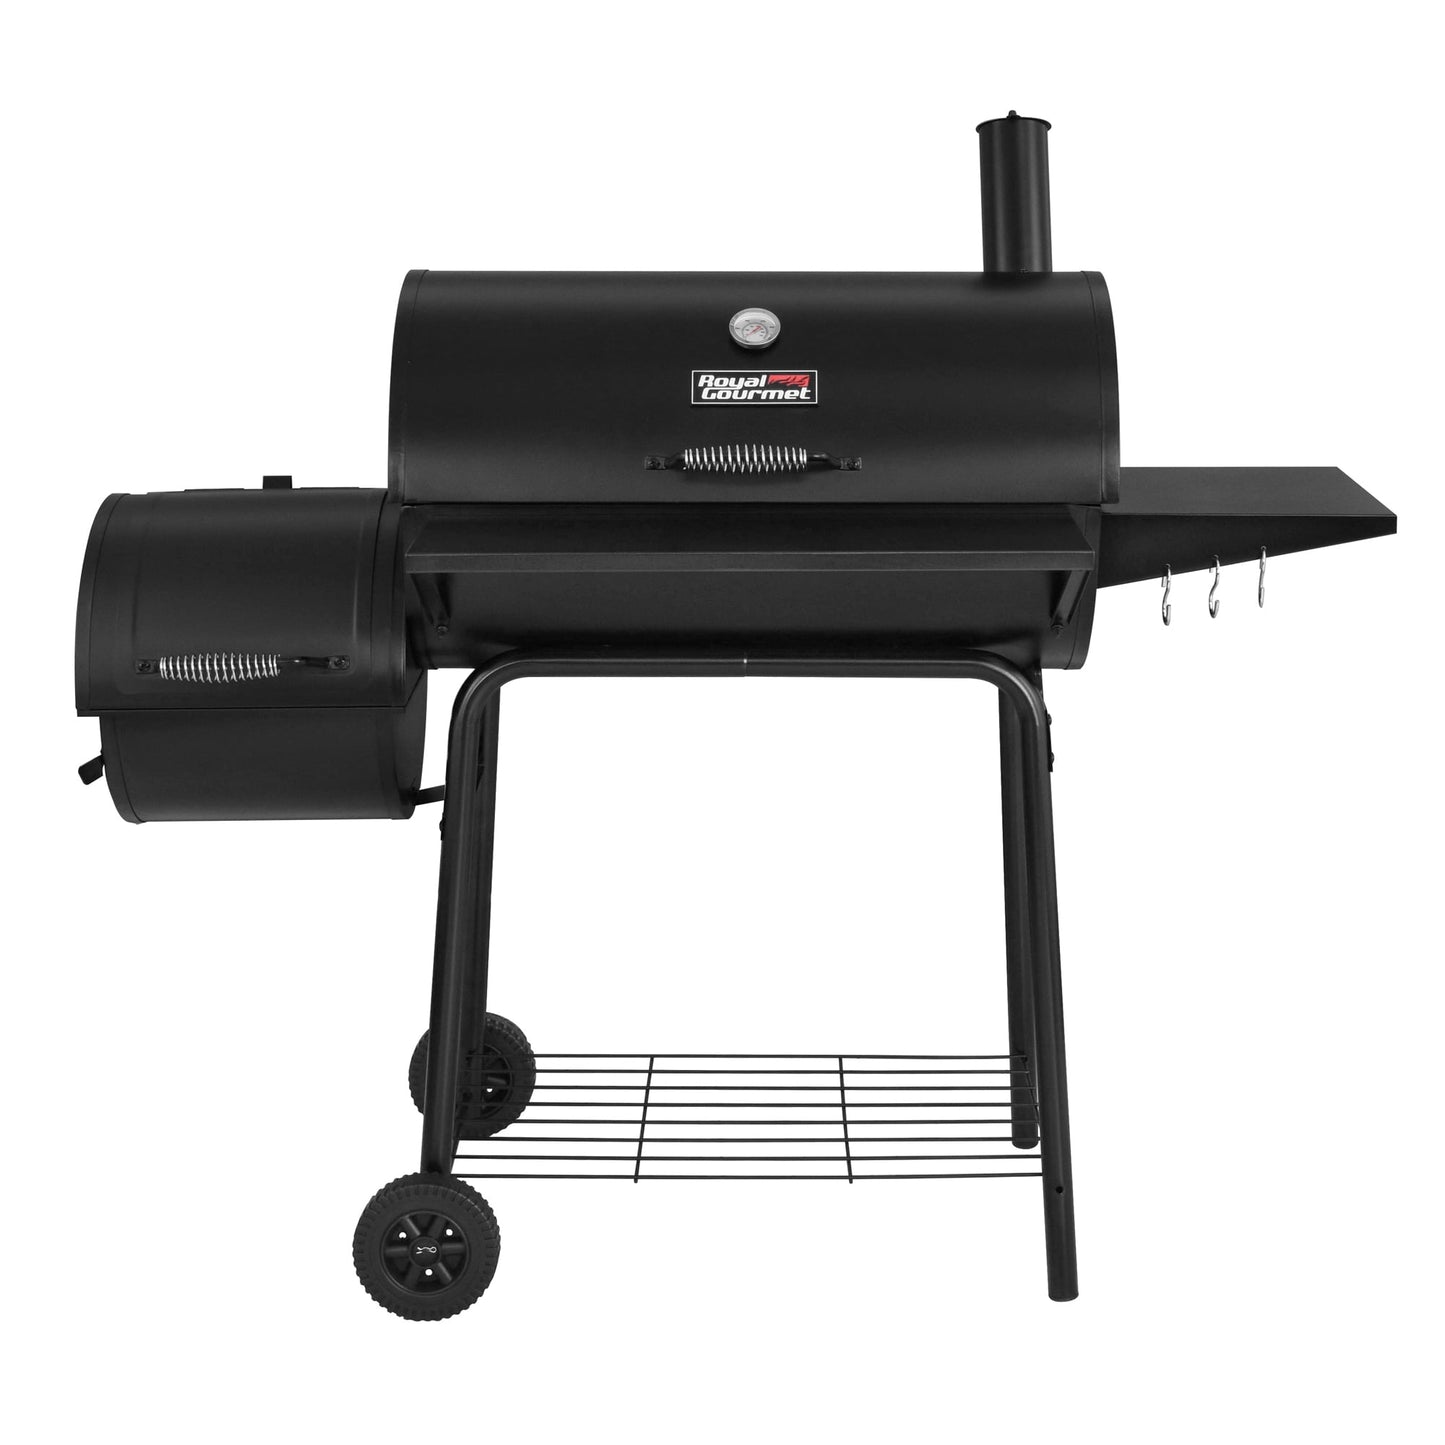 Royal Gourmet 30" CC1830S Charcoal Grill with Offset Smoker